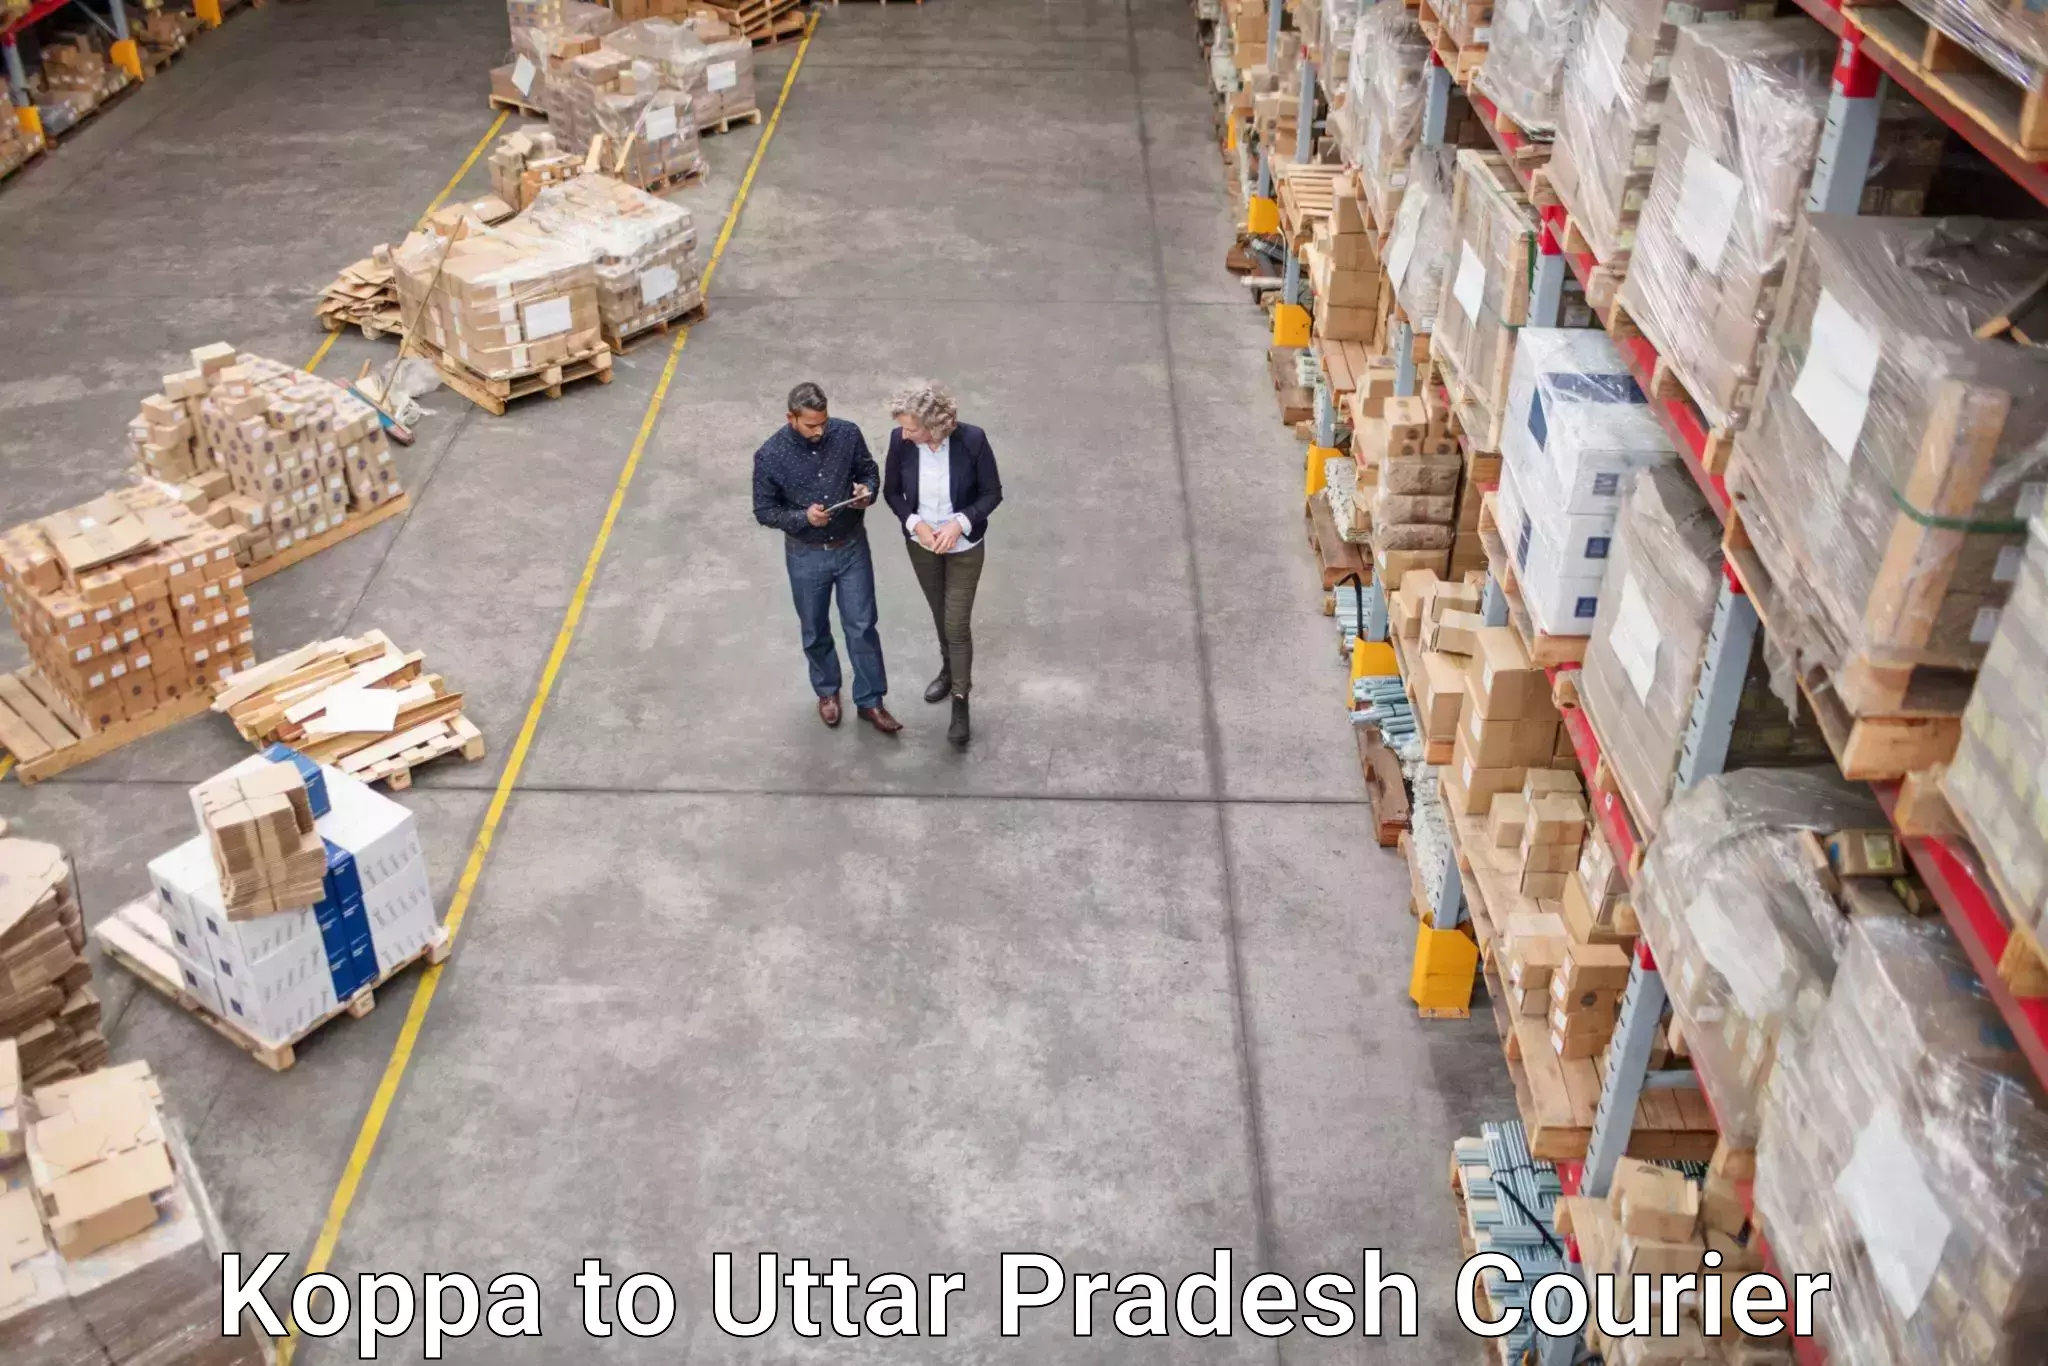 Professional parcel services Koppa to Firozabad